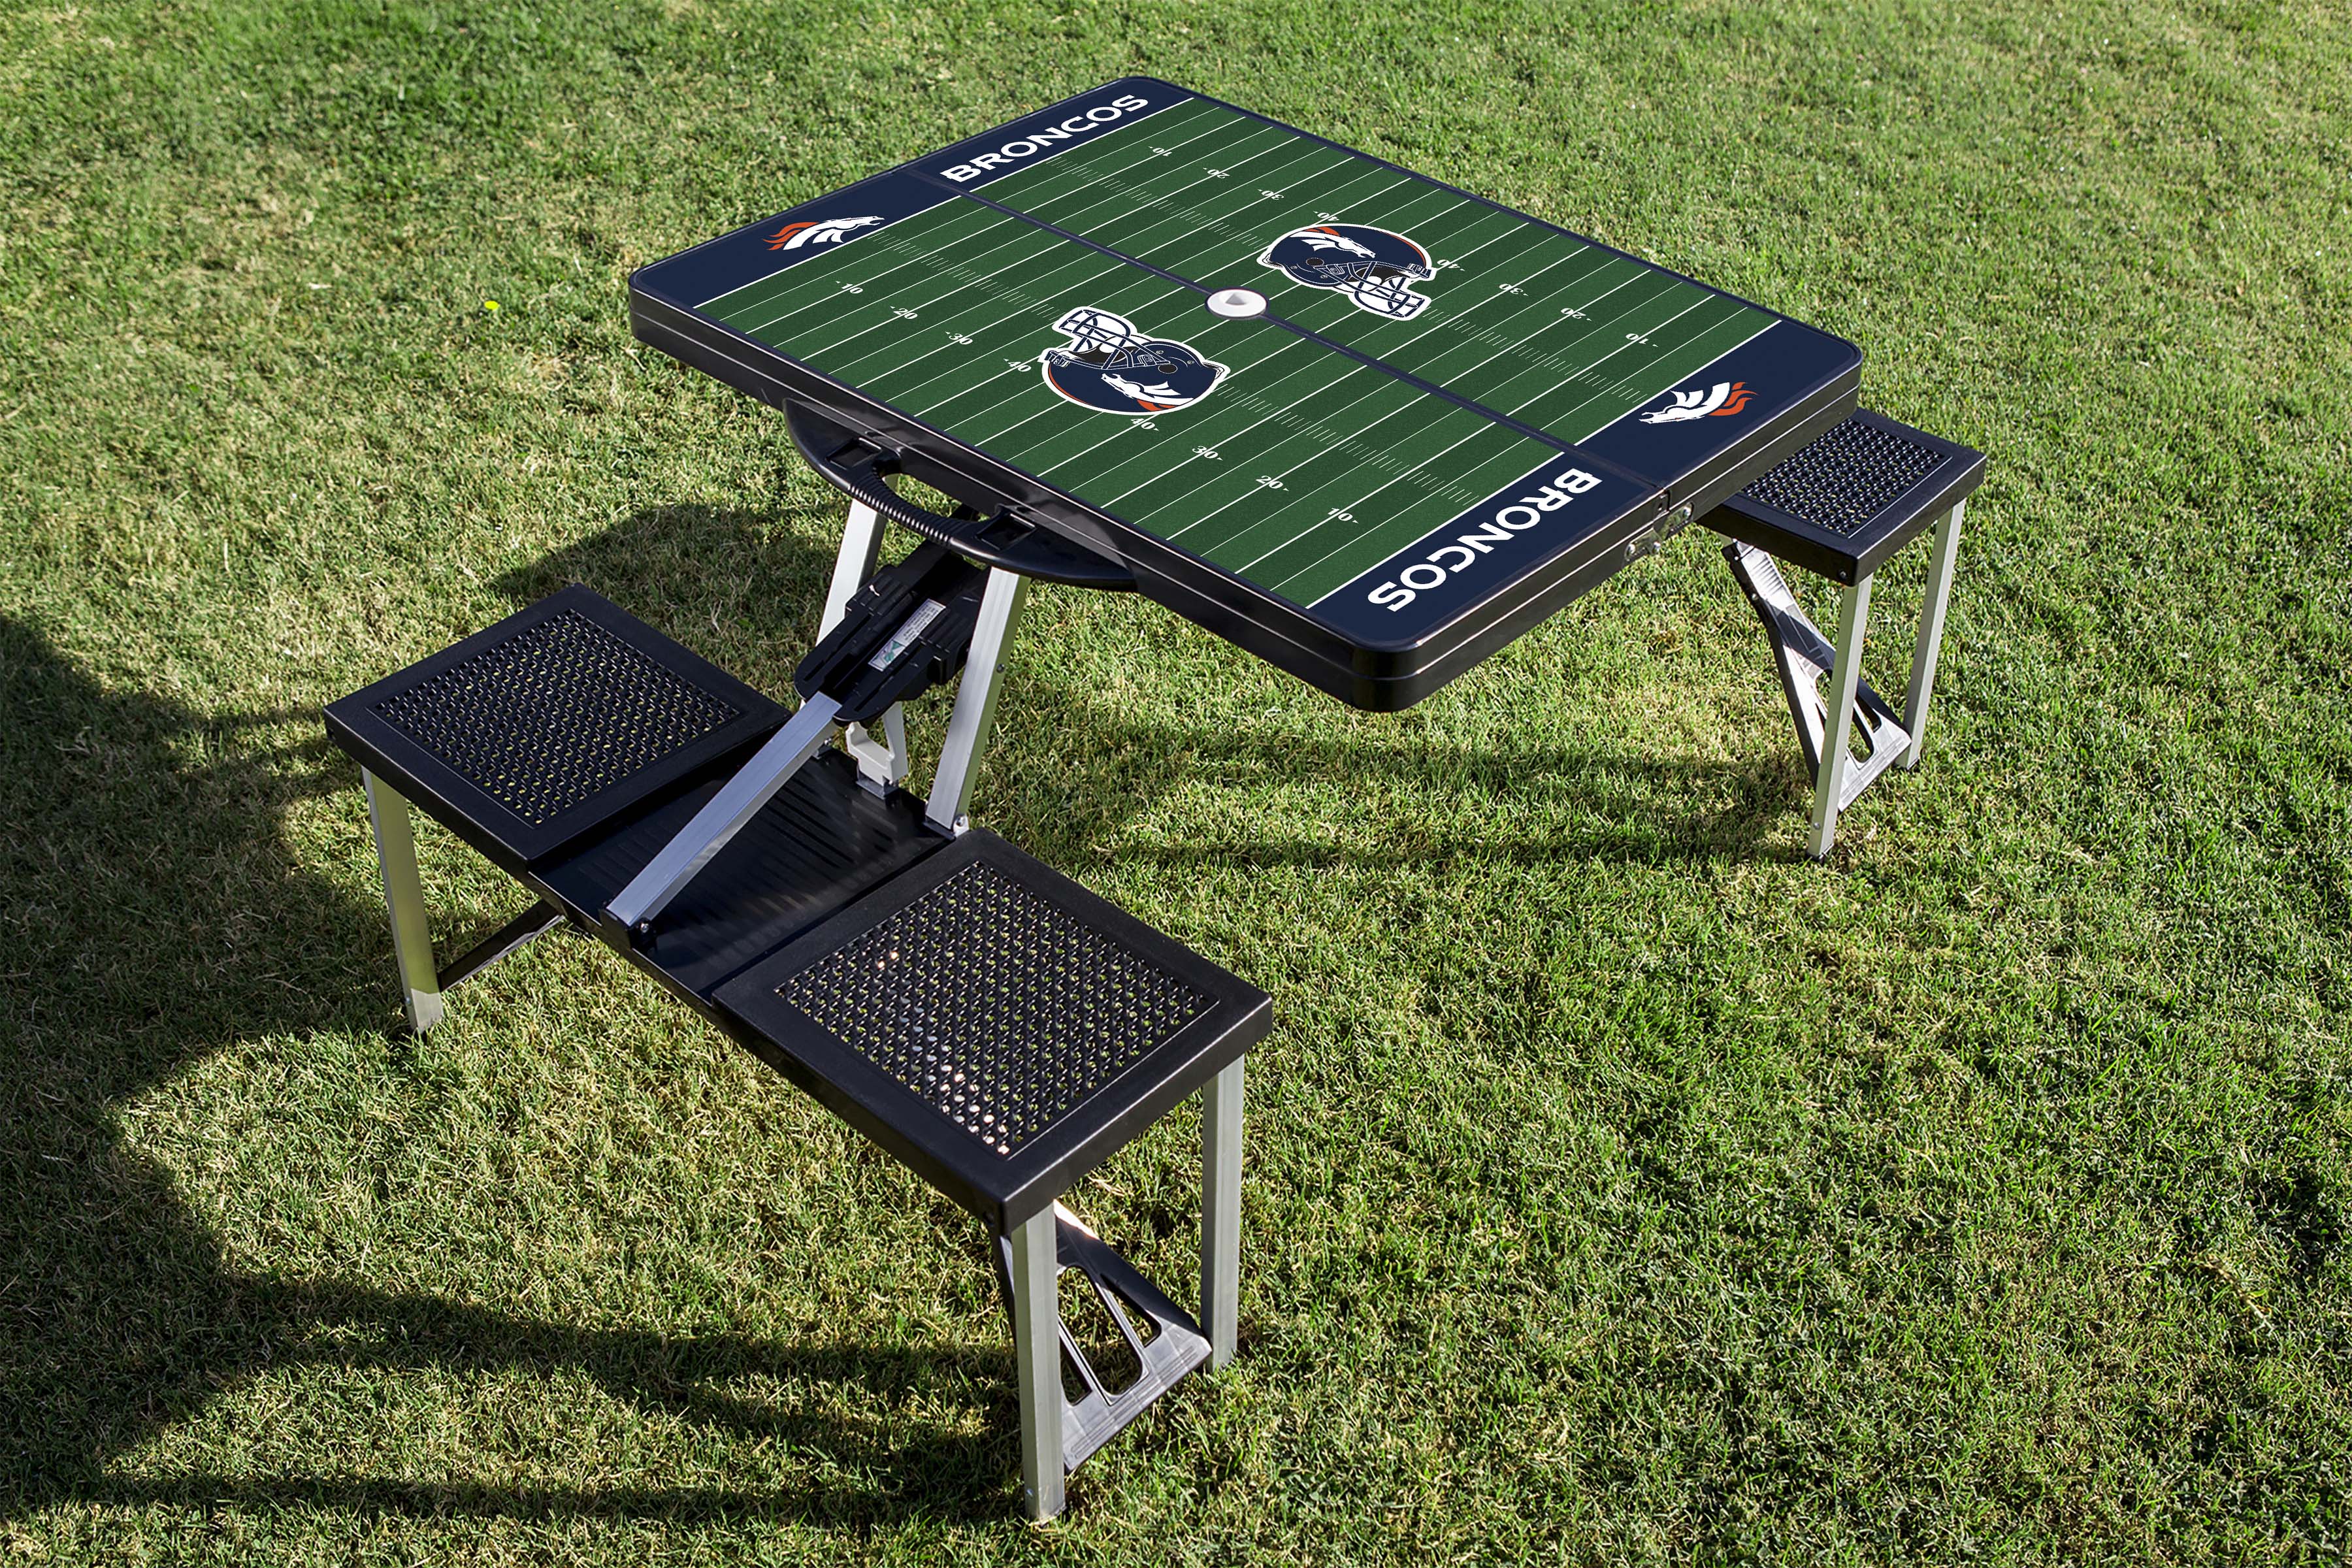 Football Field - Denver Broncos - Picnic Table Portable Folding Table with Seats